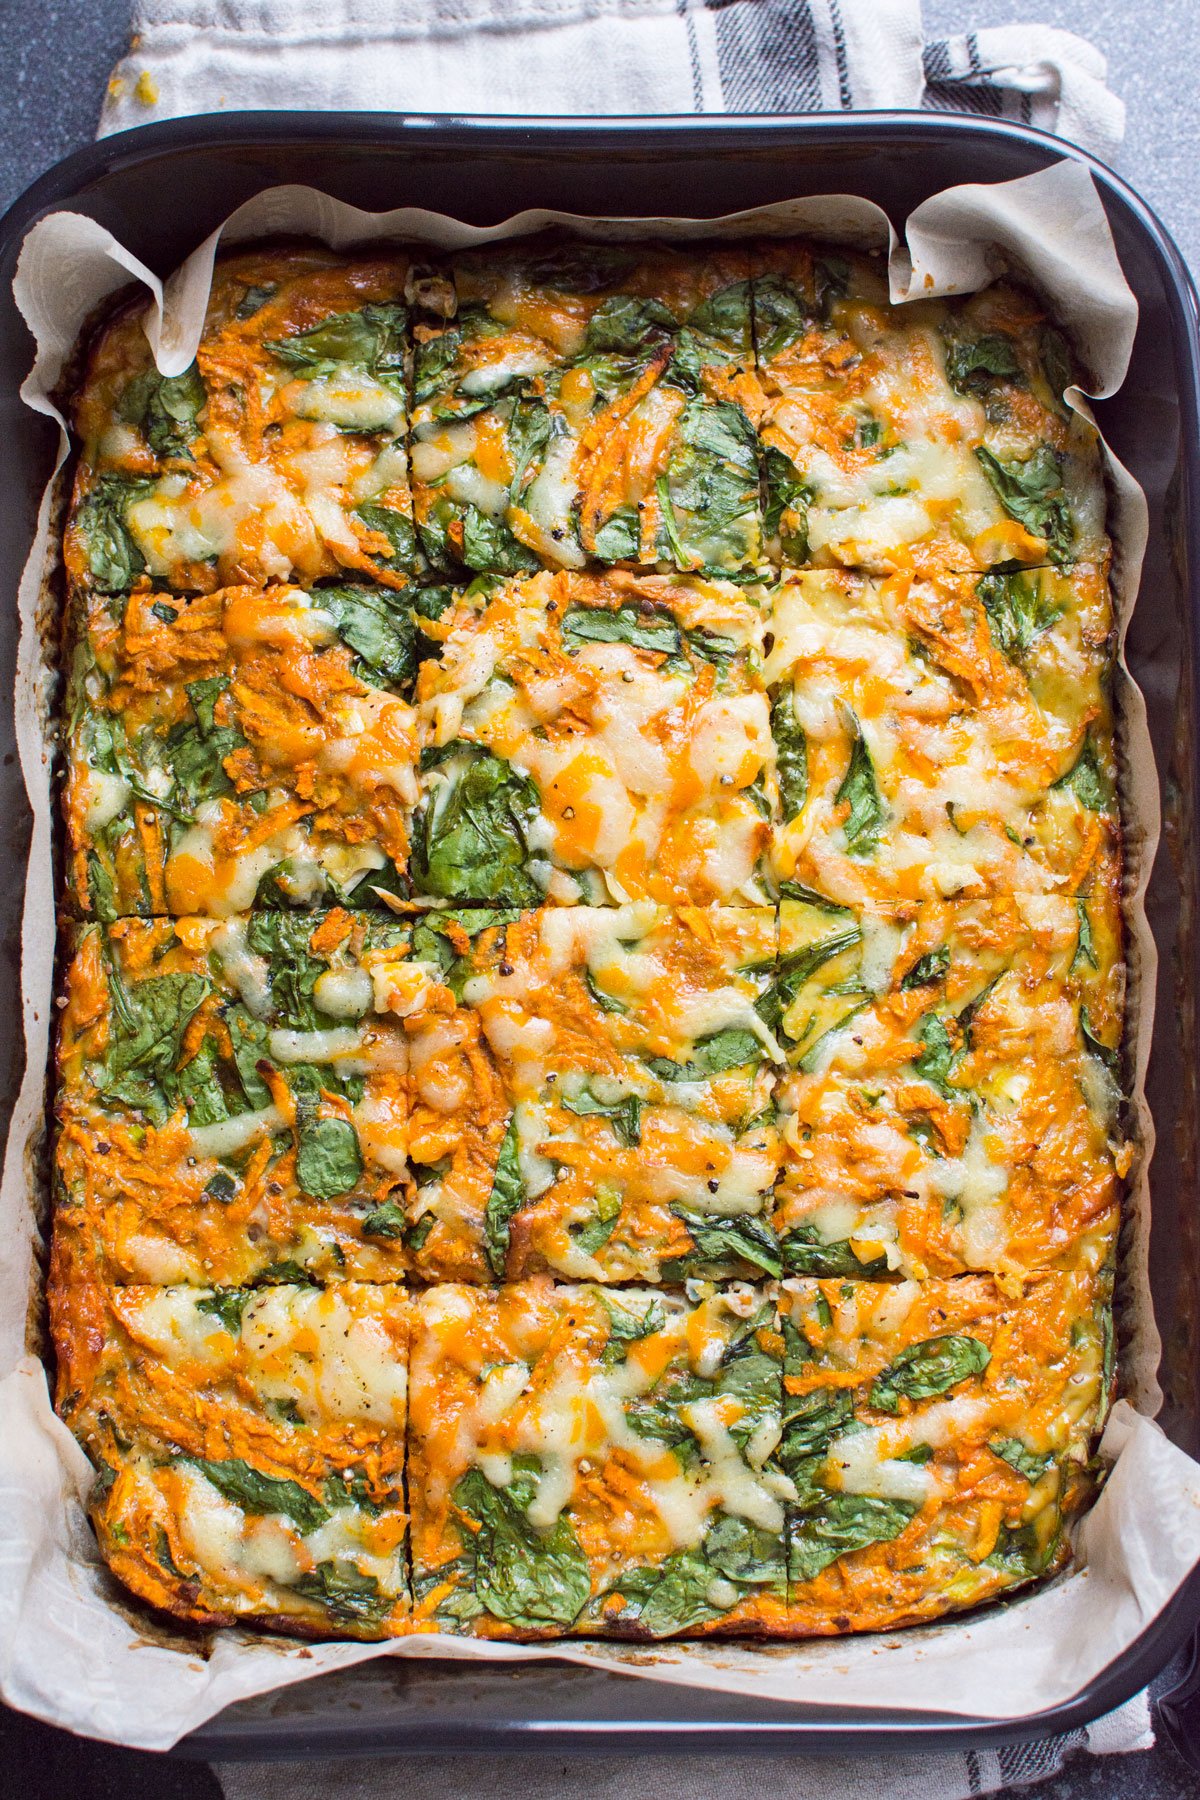 Sweet potato egg breakfast casserole with spinach in a baking dish.